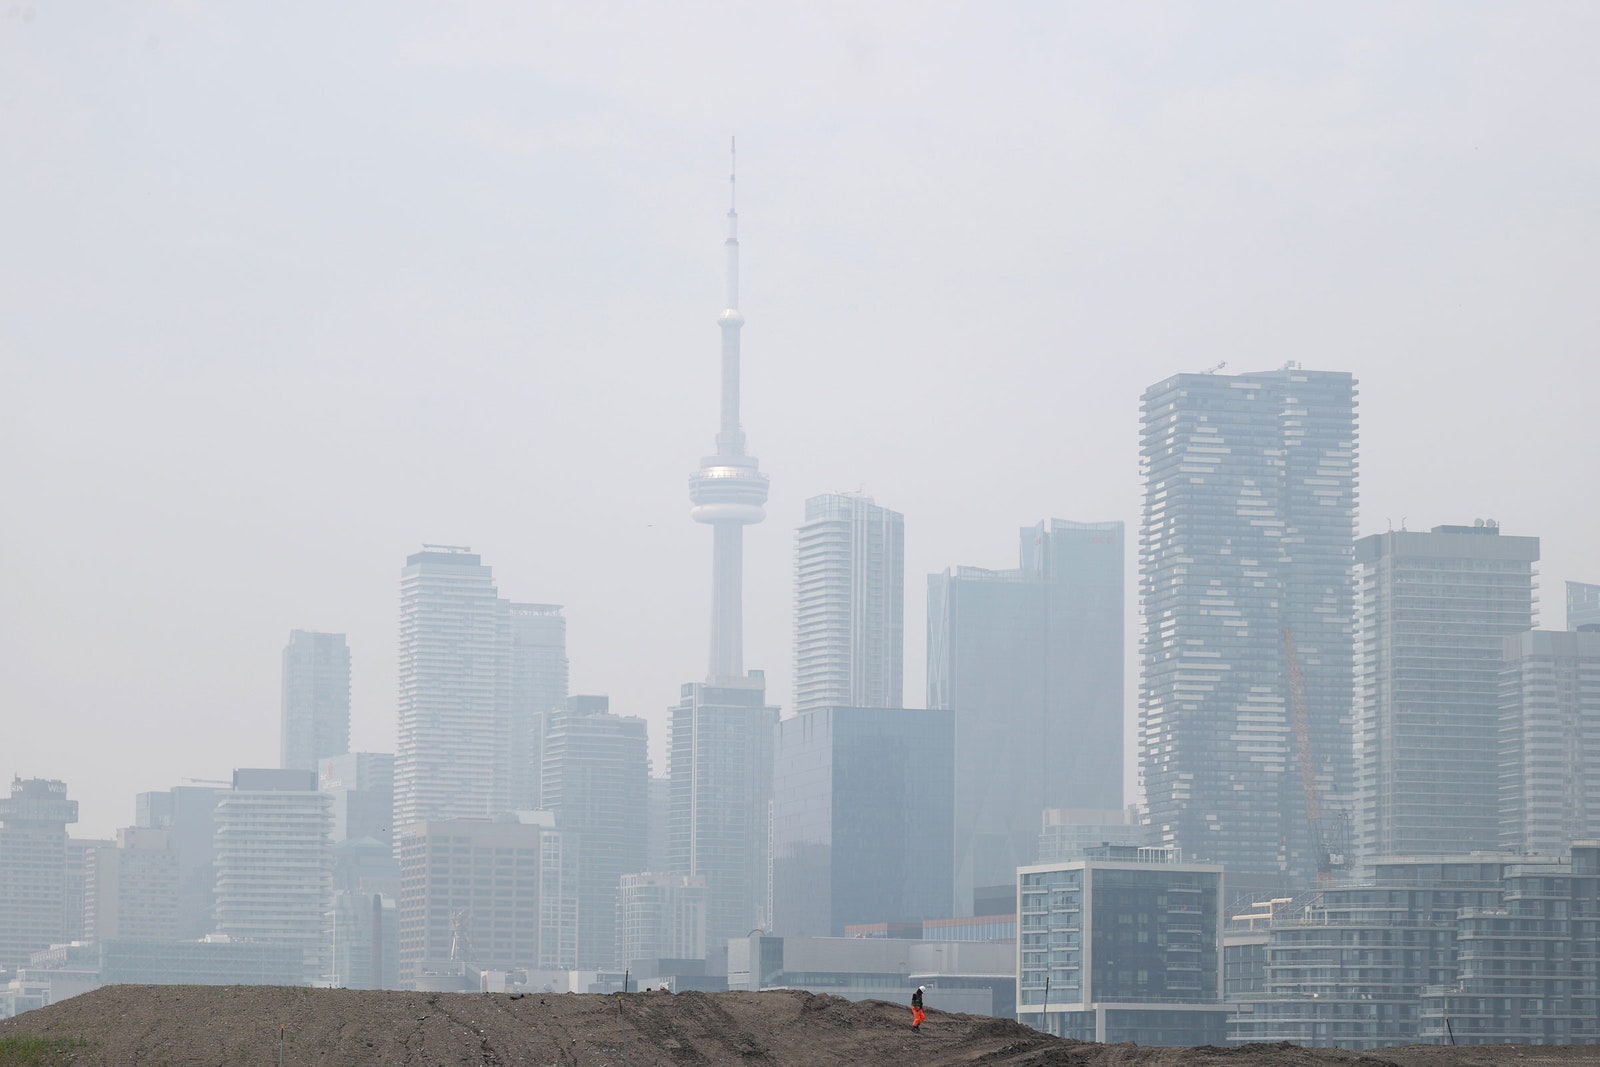 It’s Easy to Check the Air Quality. Meet the People Collecting That Data for You